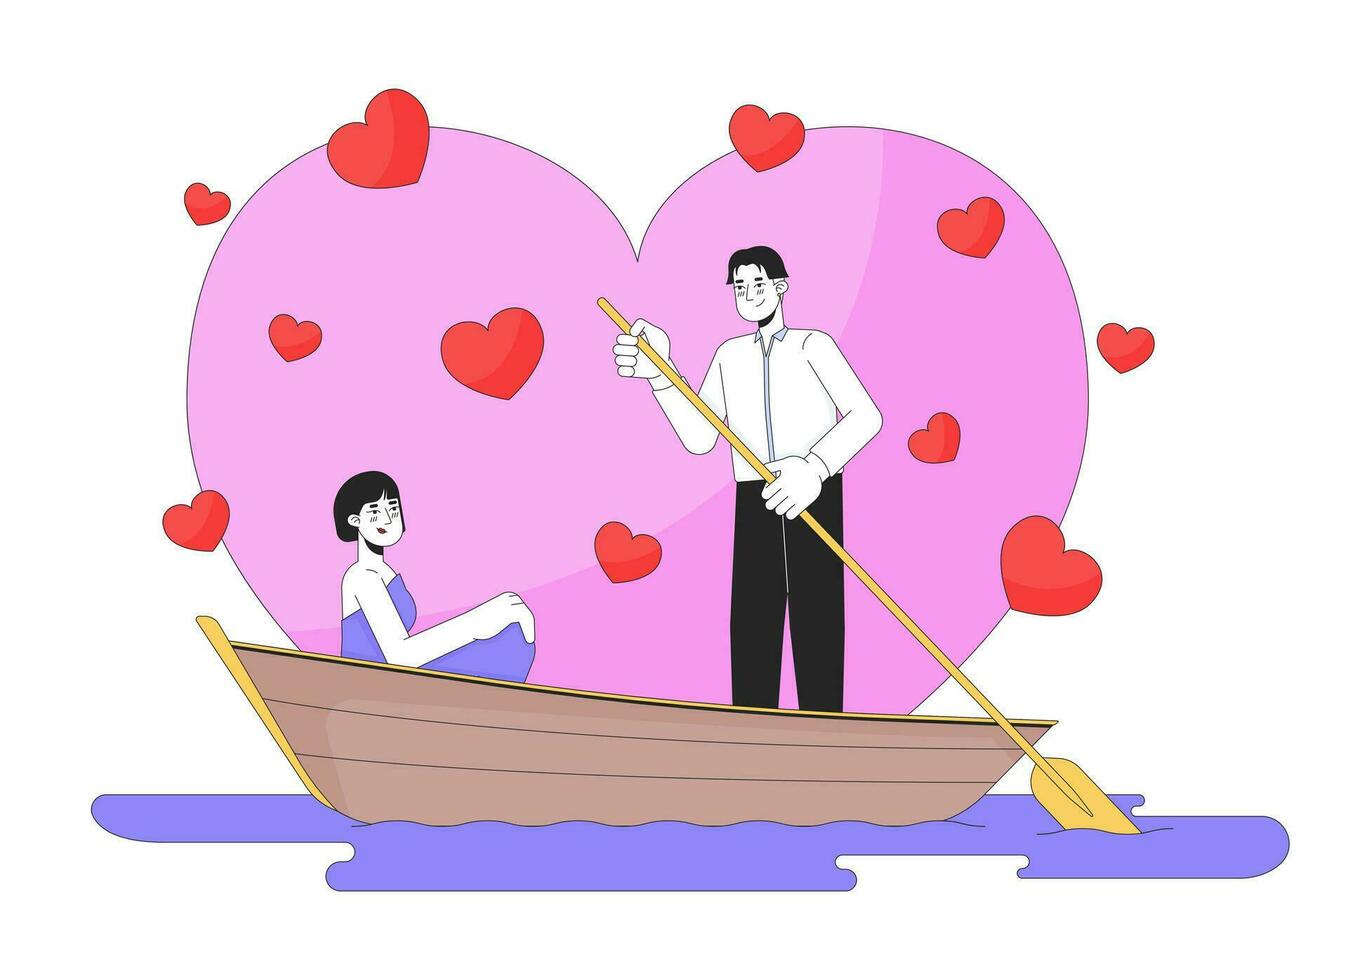 Romantic date night on lake 2D linear illustration concept. Asian young couple sweetheart cartoon characters isolated on white. Gondola paddle metaphor abstract flat vector outline graphic